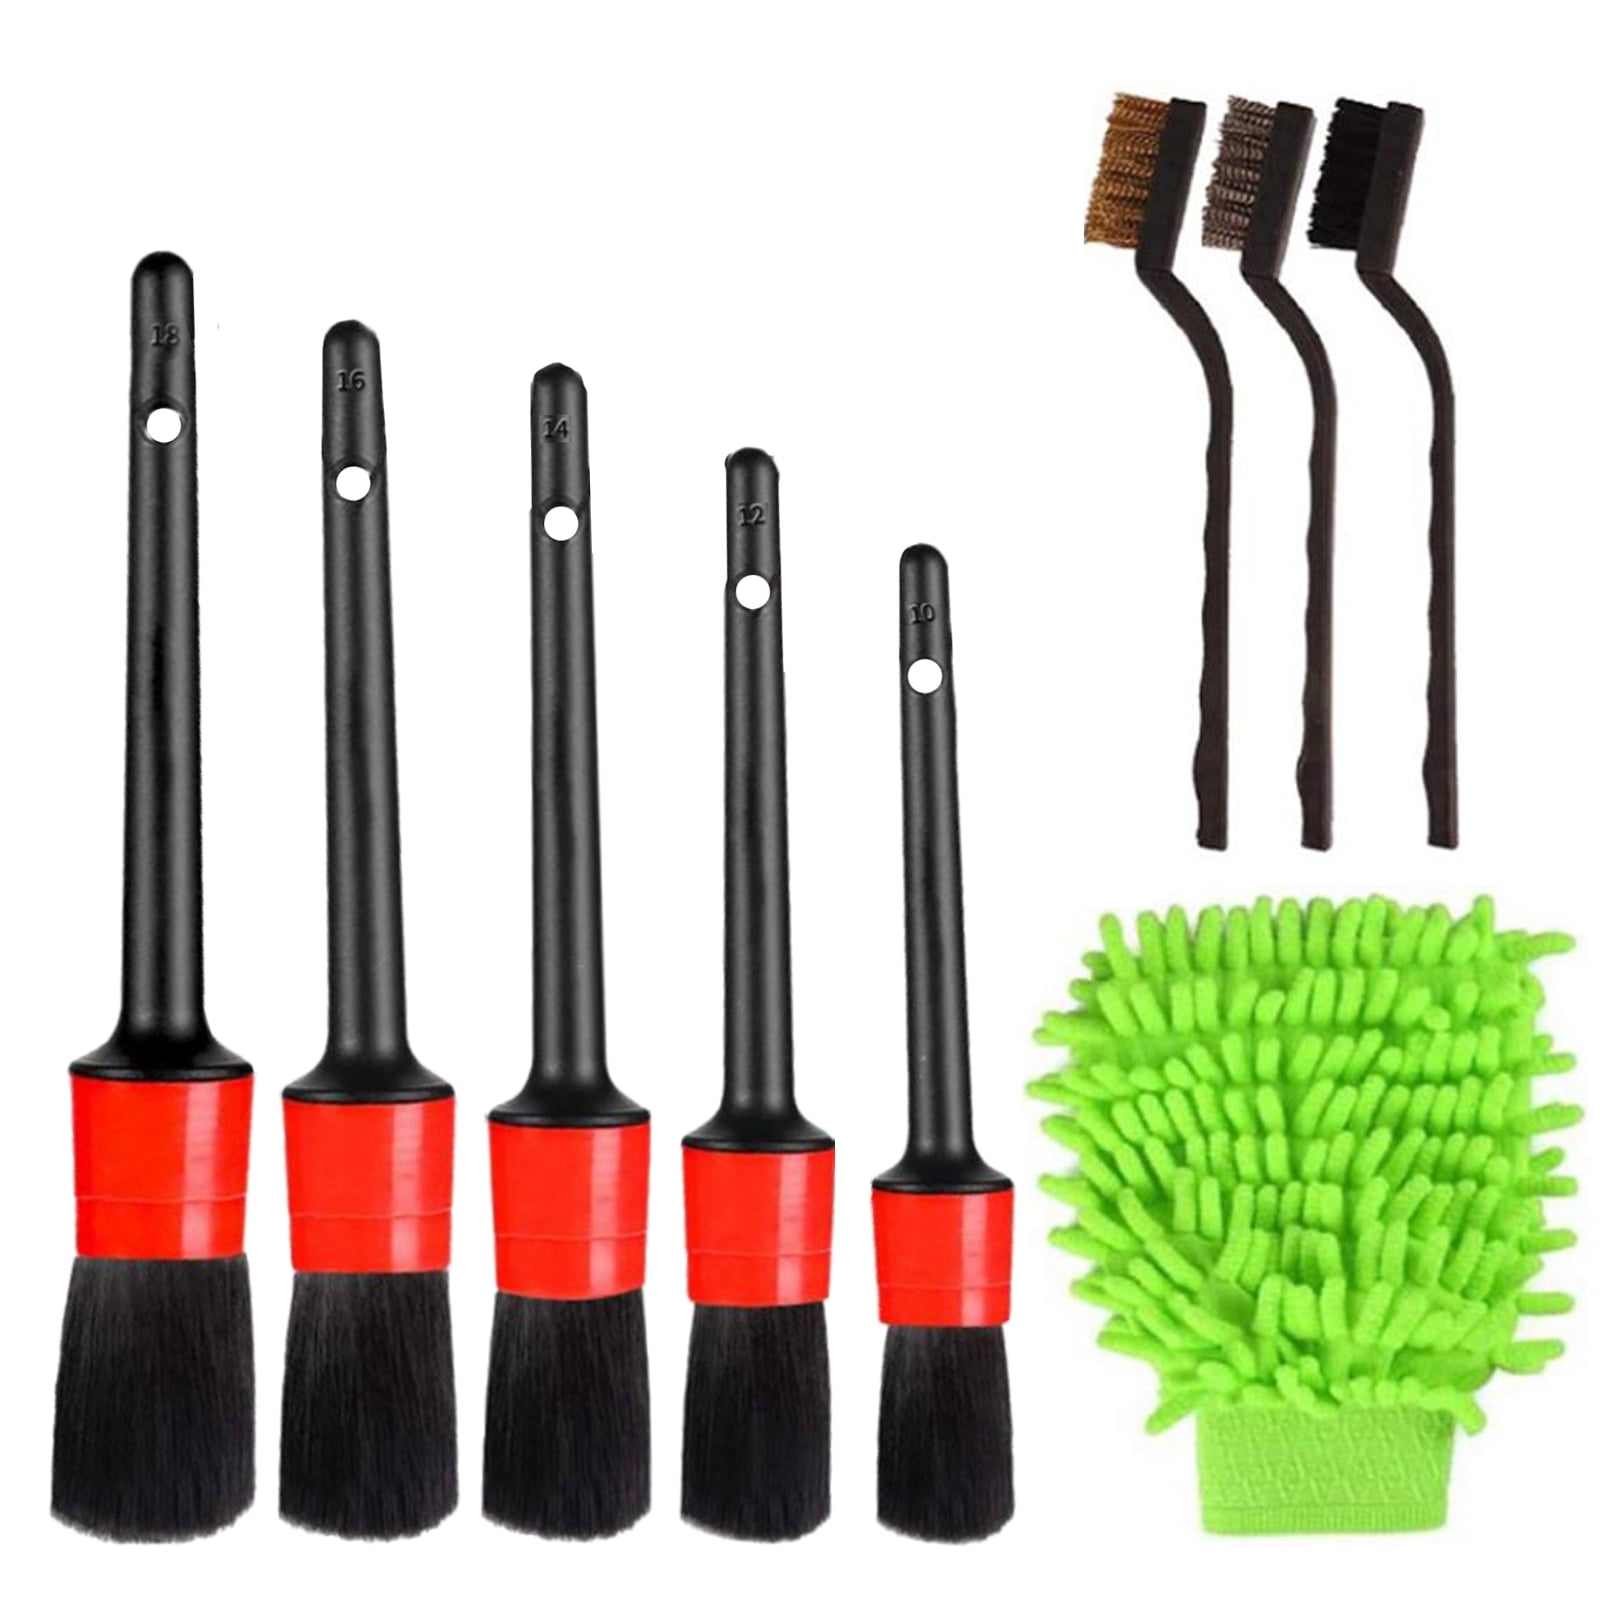 9Pcs Car Wash Cleaning Tools Kit Auto Care Interior Automotive Detail Brushes for Cleaning Wheels Exterior Leather Air Vents Emblems 